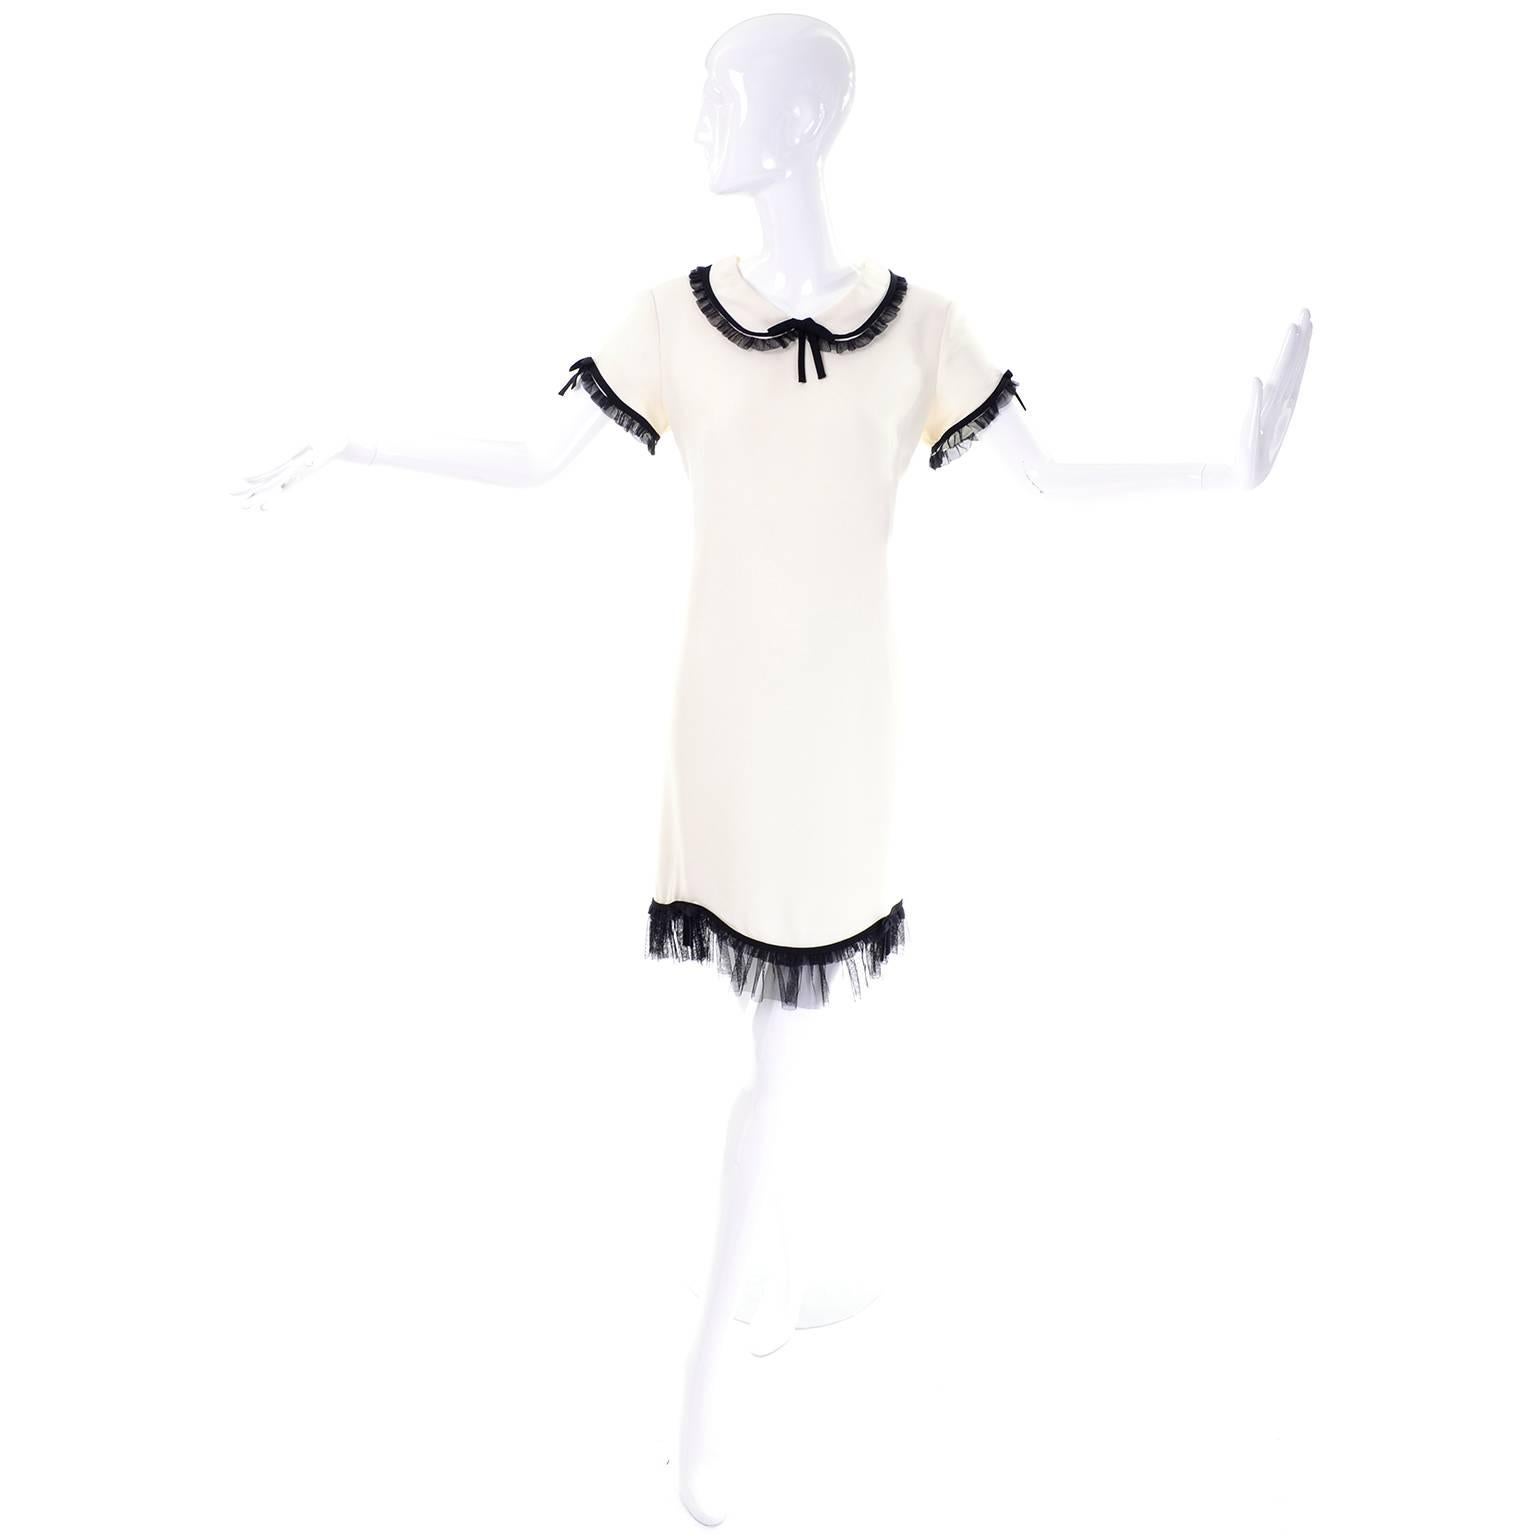 This adorable vintage short sleeved dress from Moschino is made in an ivory rayon / acetate blend crepe and has black ruffled netting or tulle at the collar, hemline, and sleeves.  This Cheap and Chic by Moschino dress was made in Italy,  The dress